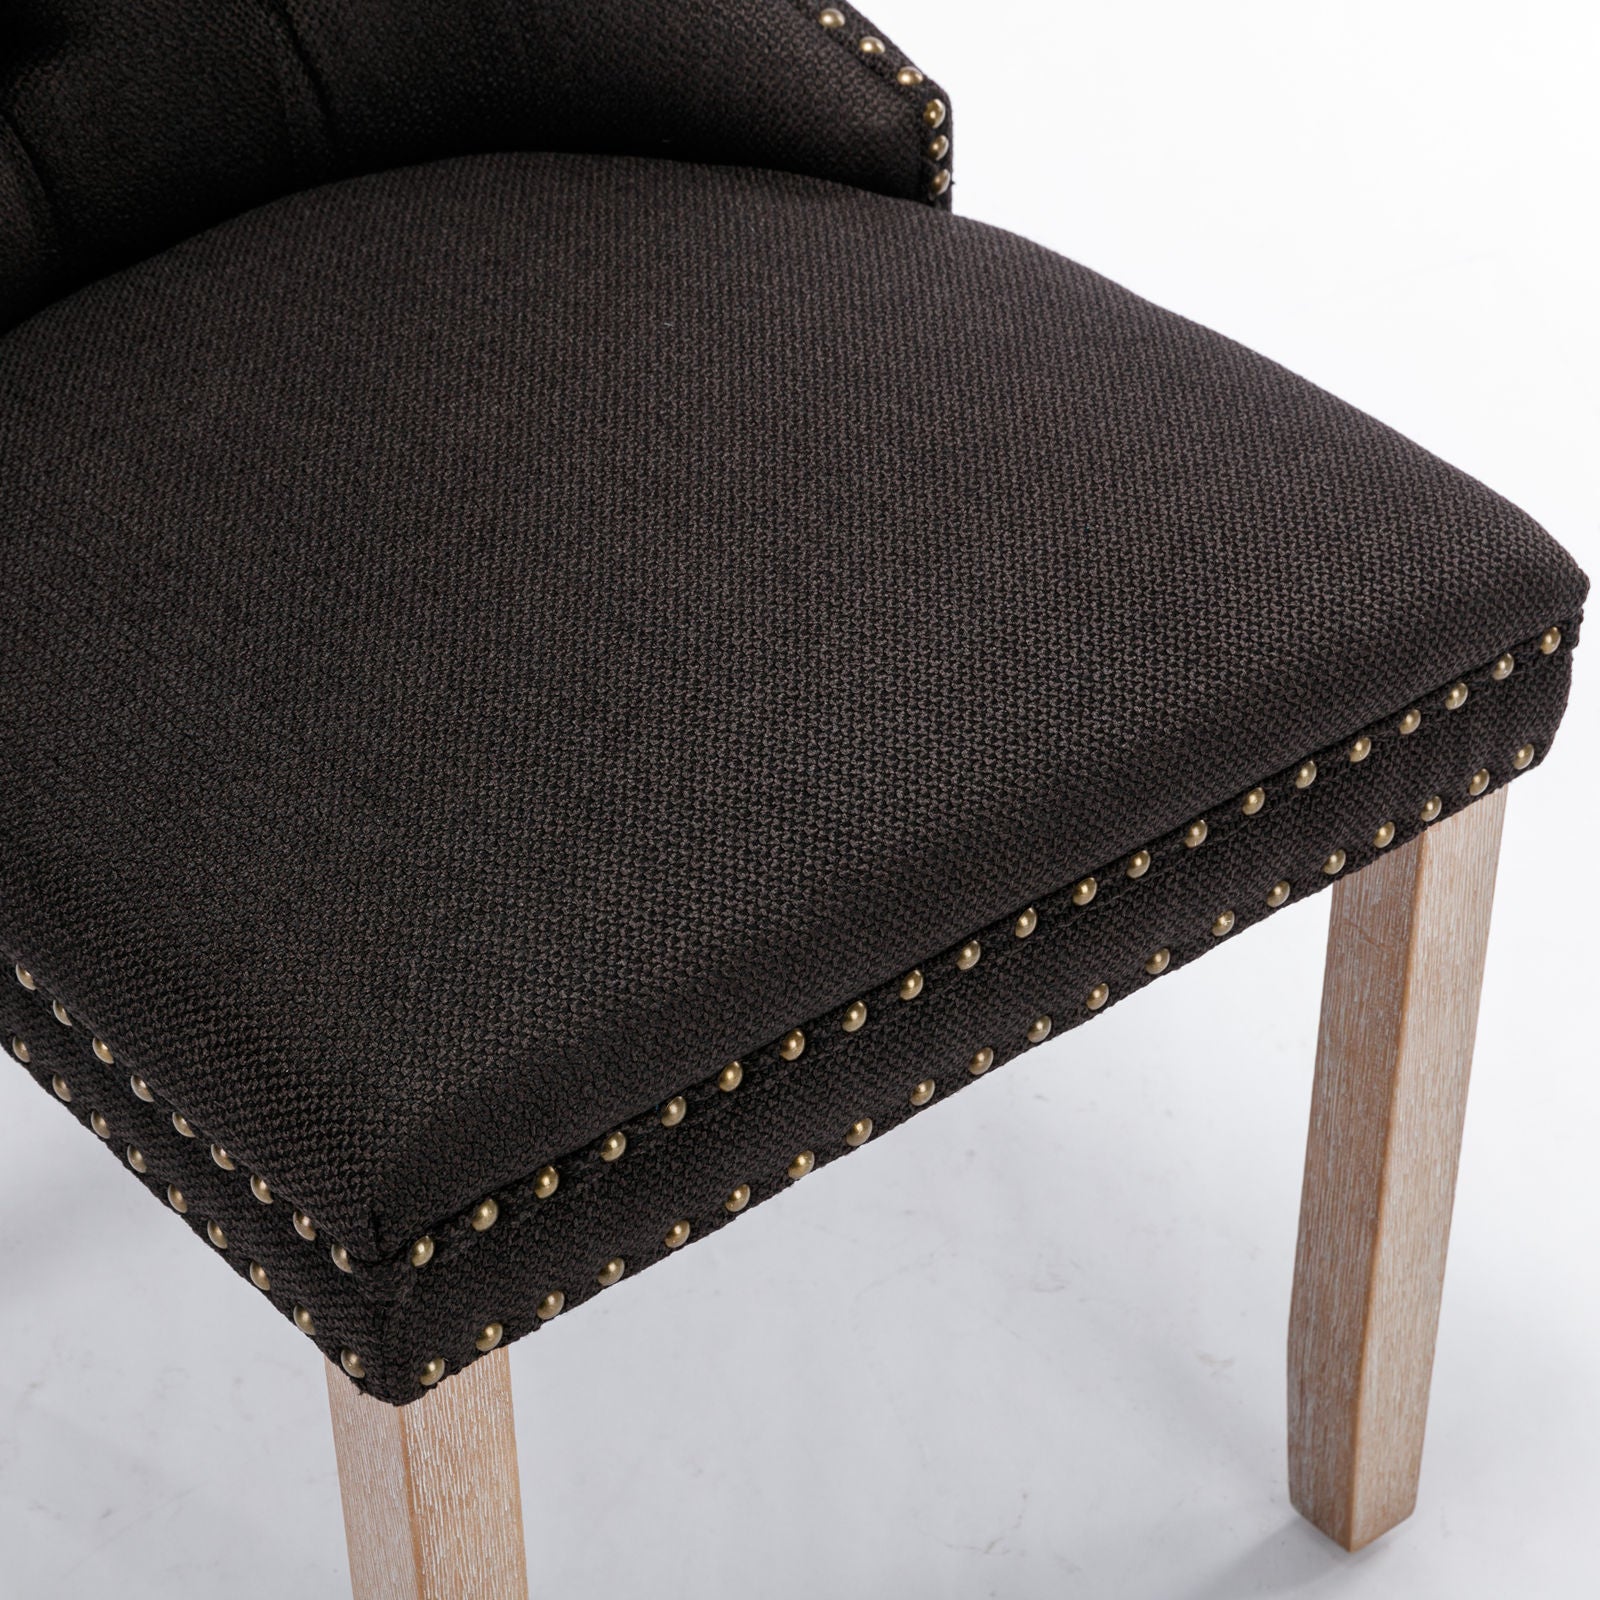 Set of 2 - High-end Tufted Solid Wood Contemporary Flax Upholstered Linen Dining Chair with Wood Legs Nailhead Trim - Black Linen